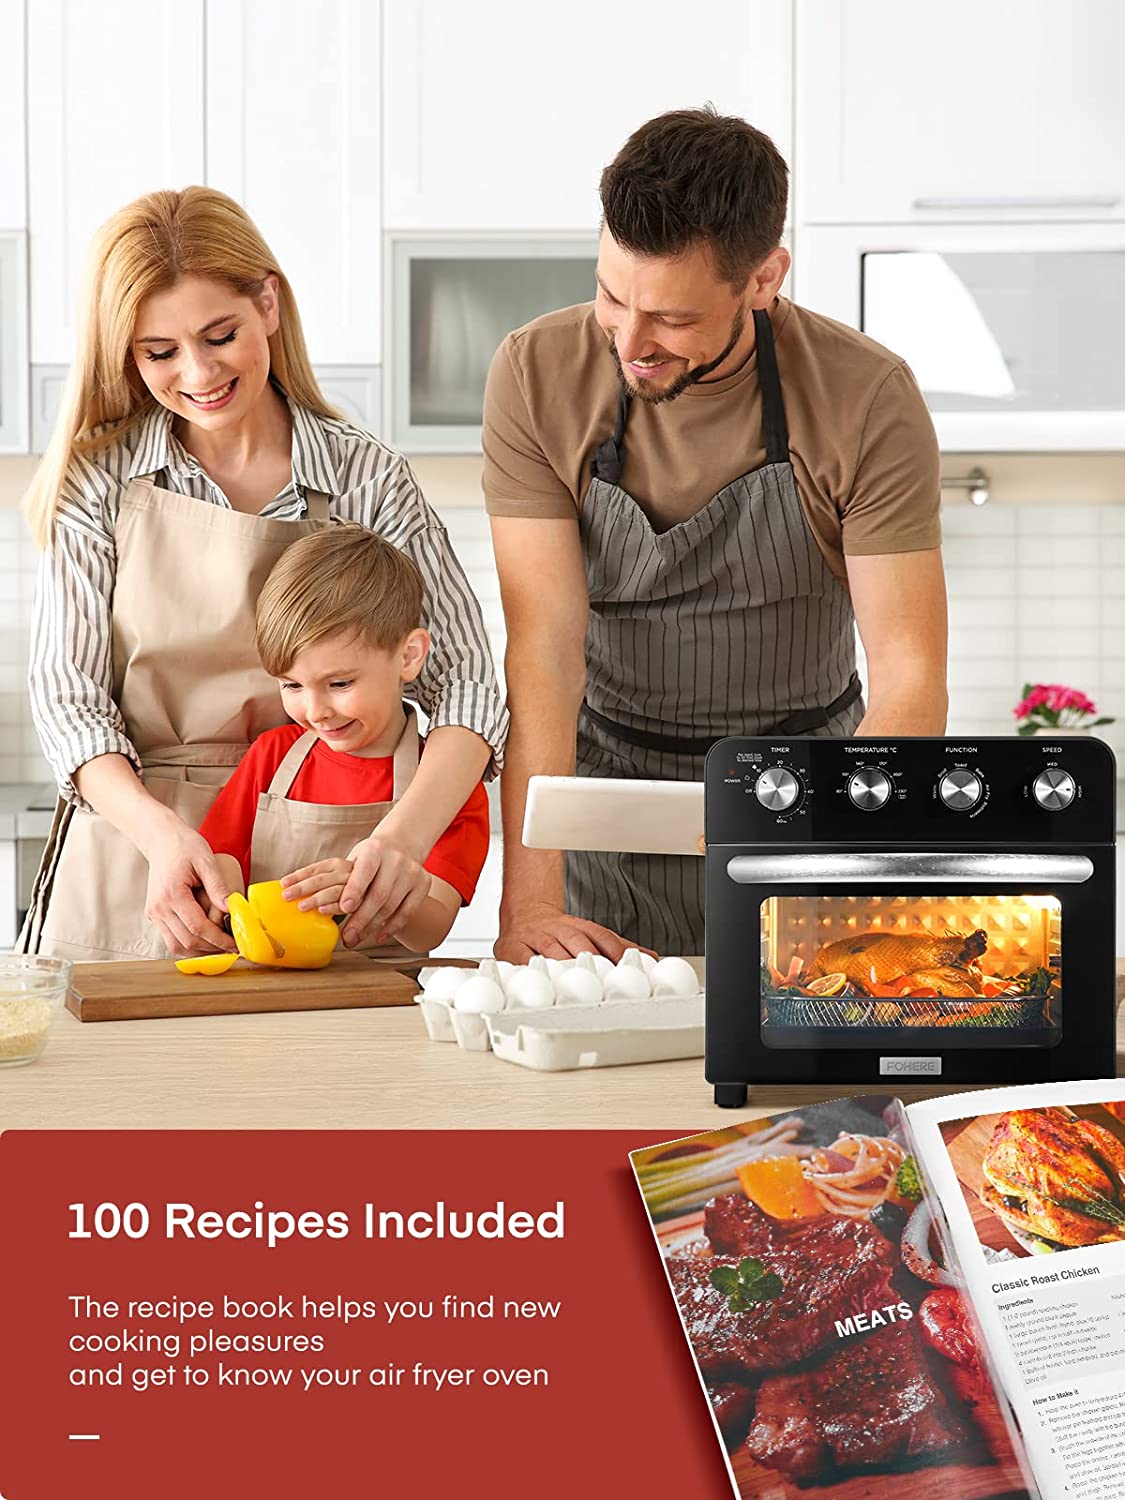 FOHERE Air Fryer Toaster Oven Combo, 20QT Smart Convection Ovens  Countertop, 7 Cooking Functions for Roast, Bake, Broil, Air Fry, Free  Accessories